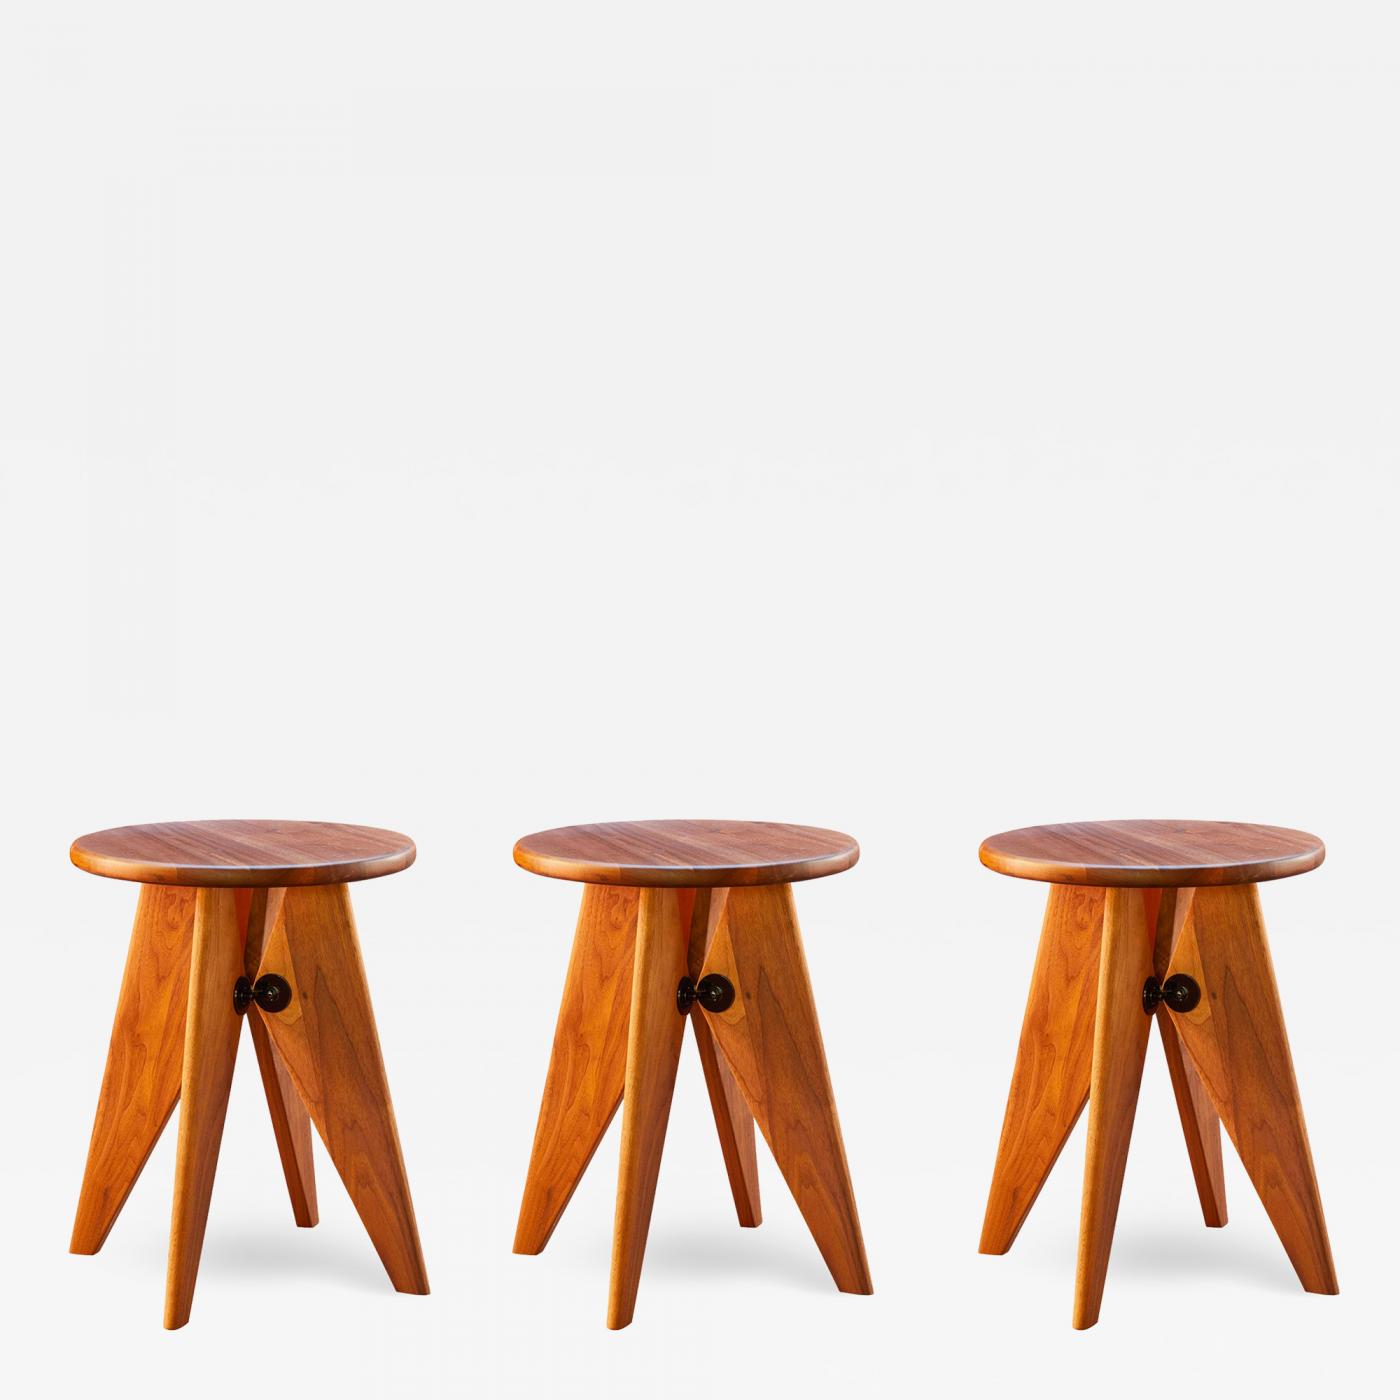 American - Jean Tabouret of in Vitra Set 3 Walnut Solvay Prouvé Stools